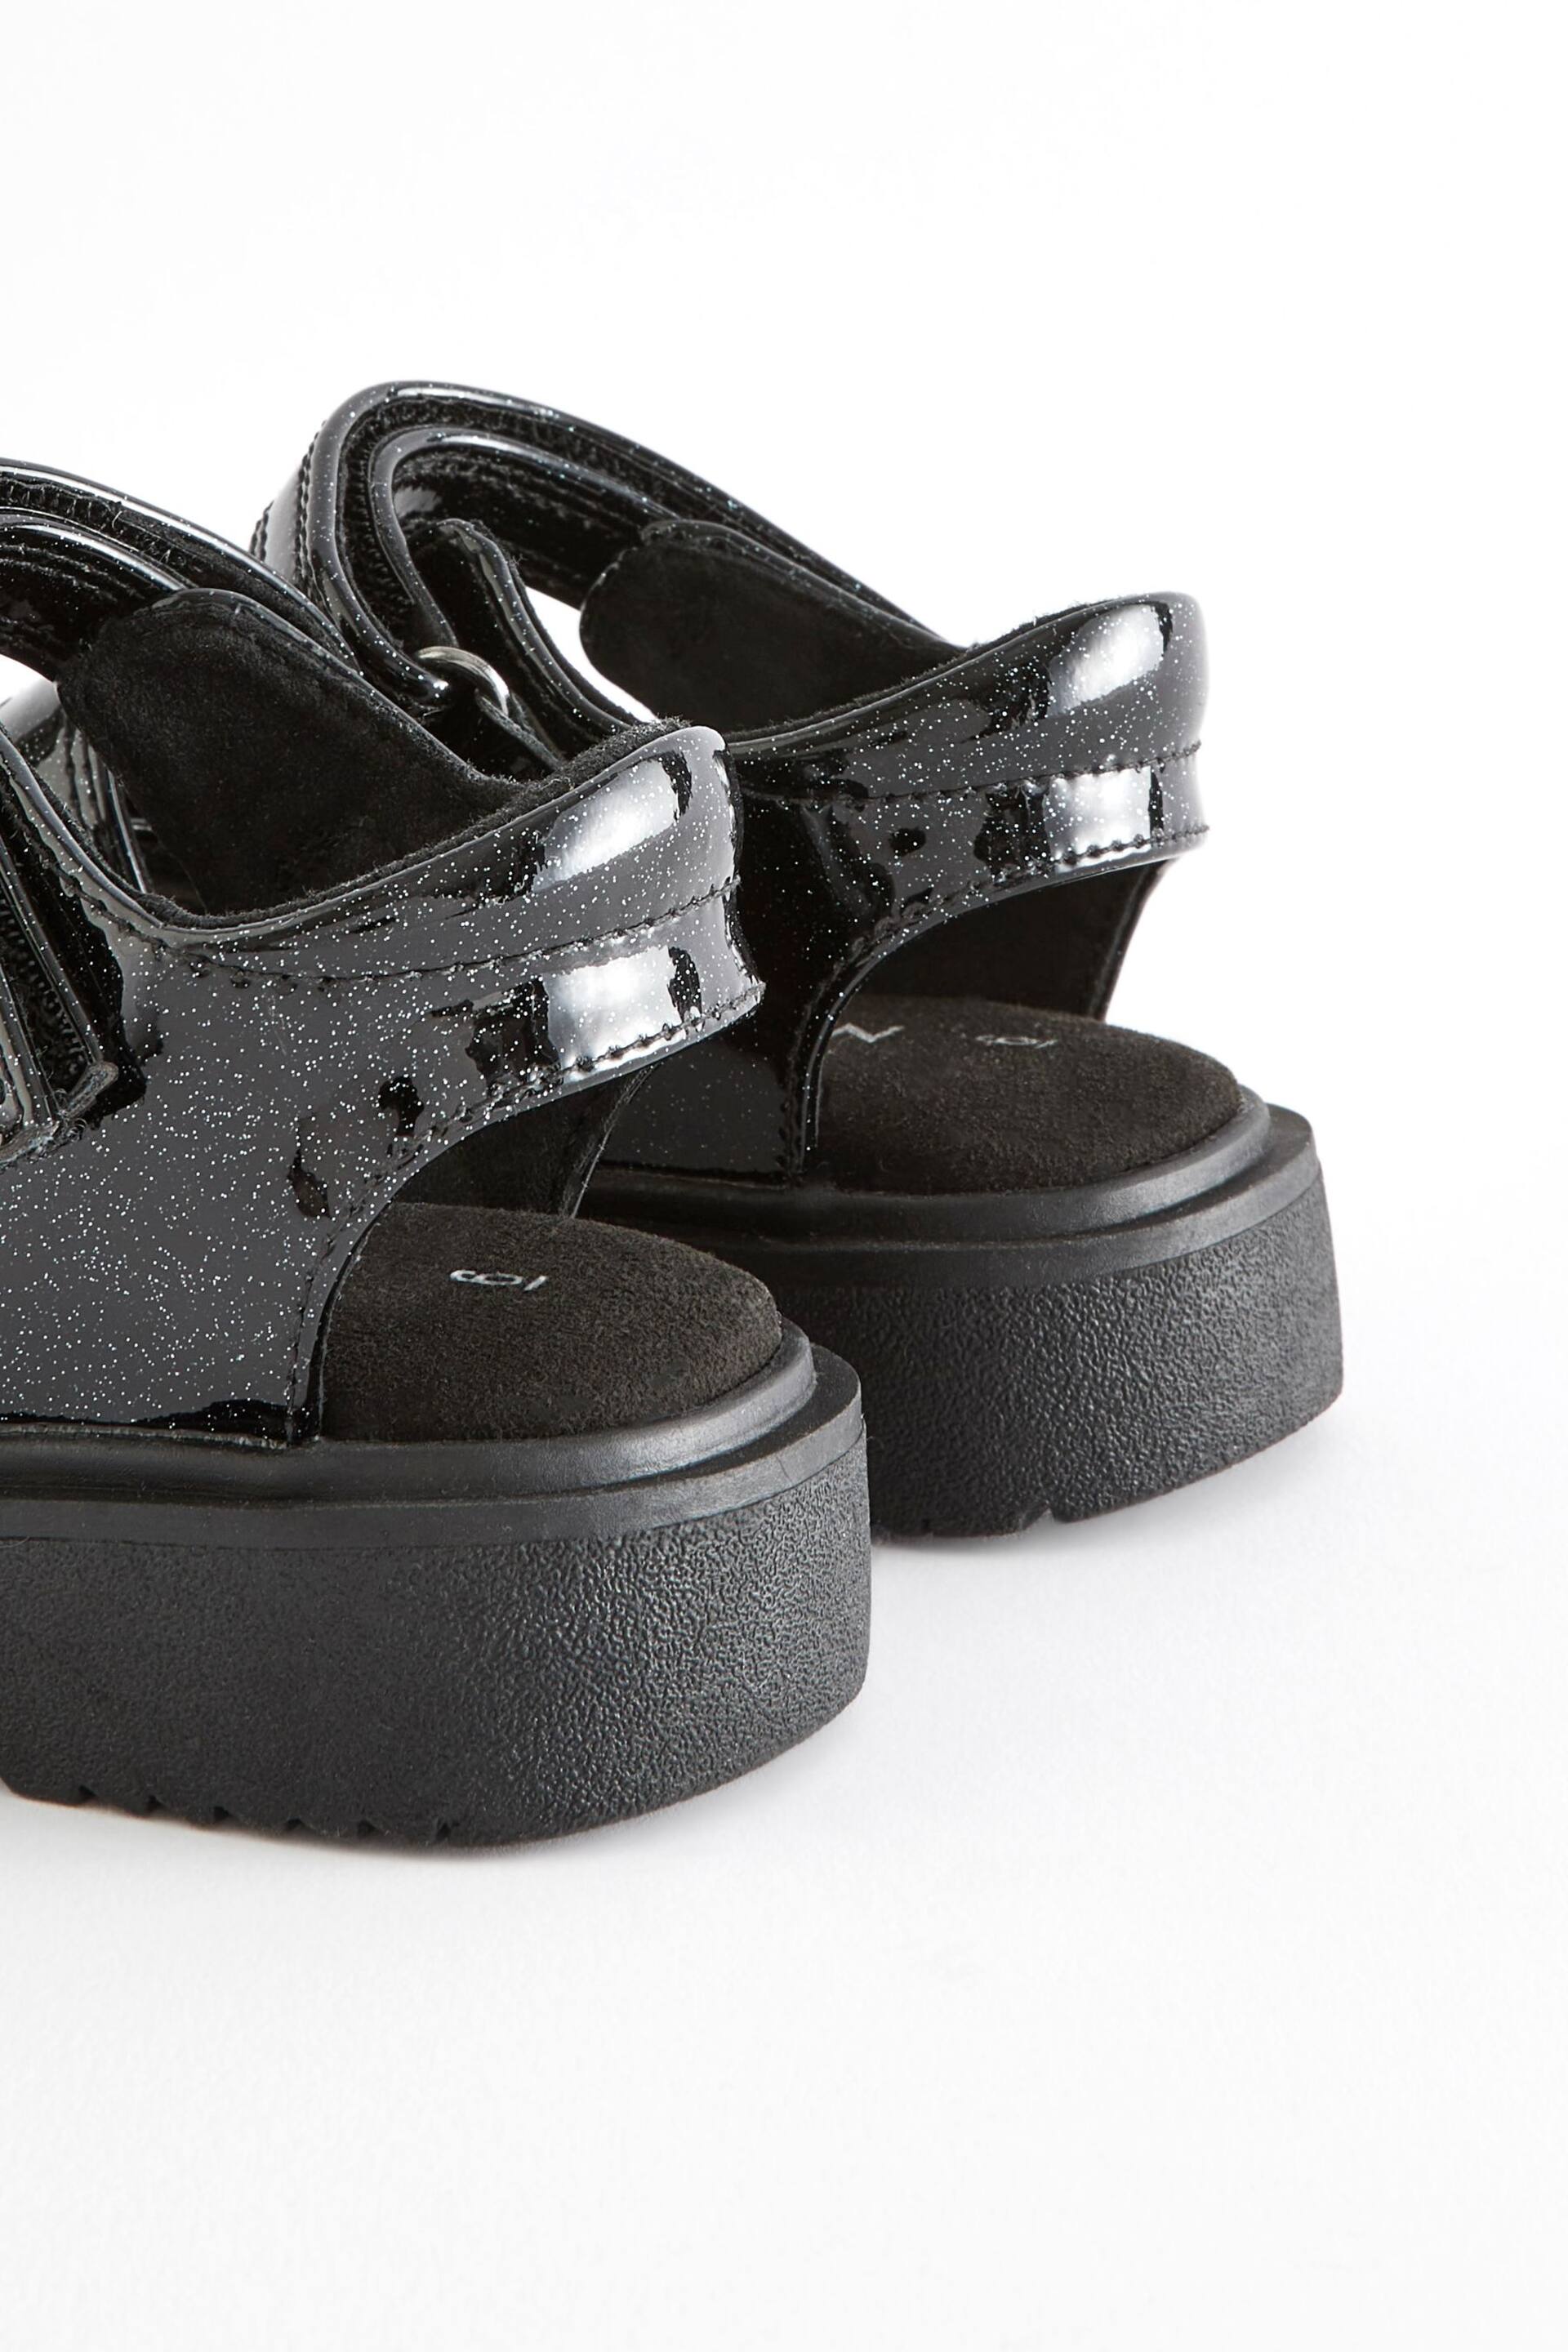 Black Chunky Sandals - Image 11 of 11